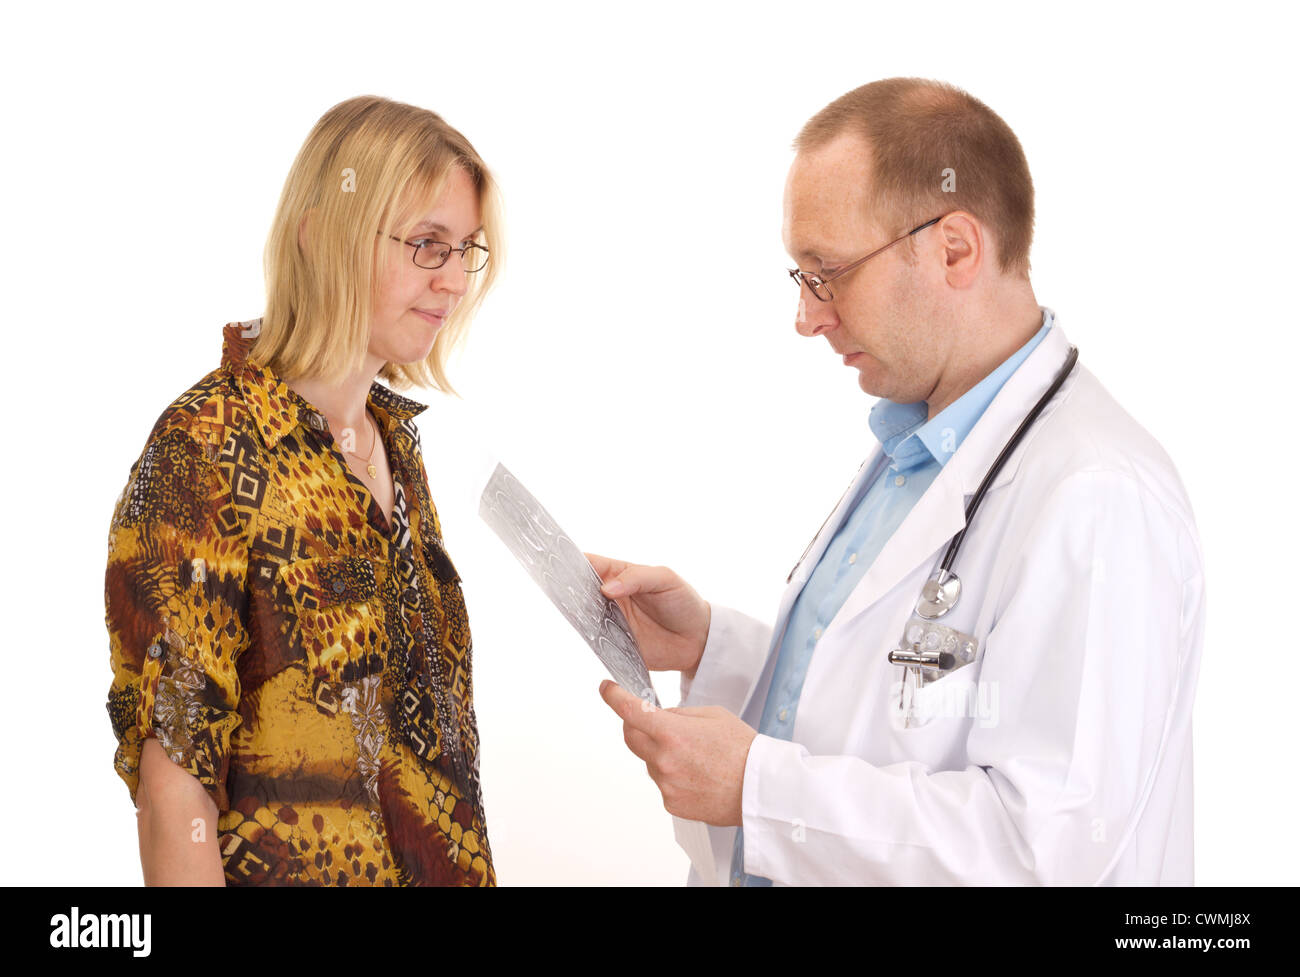 Medical doctor examining a patient Stock Photo